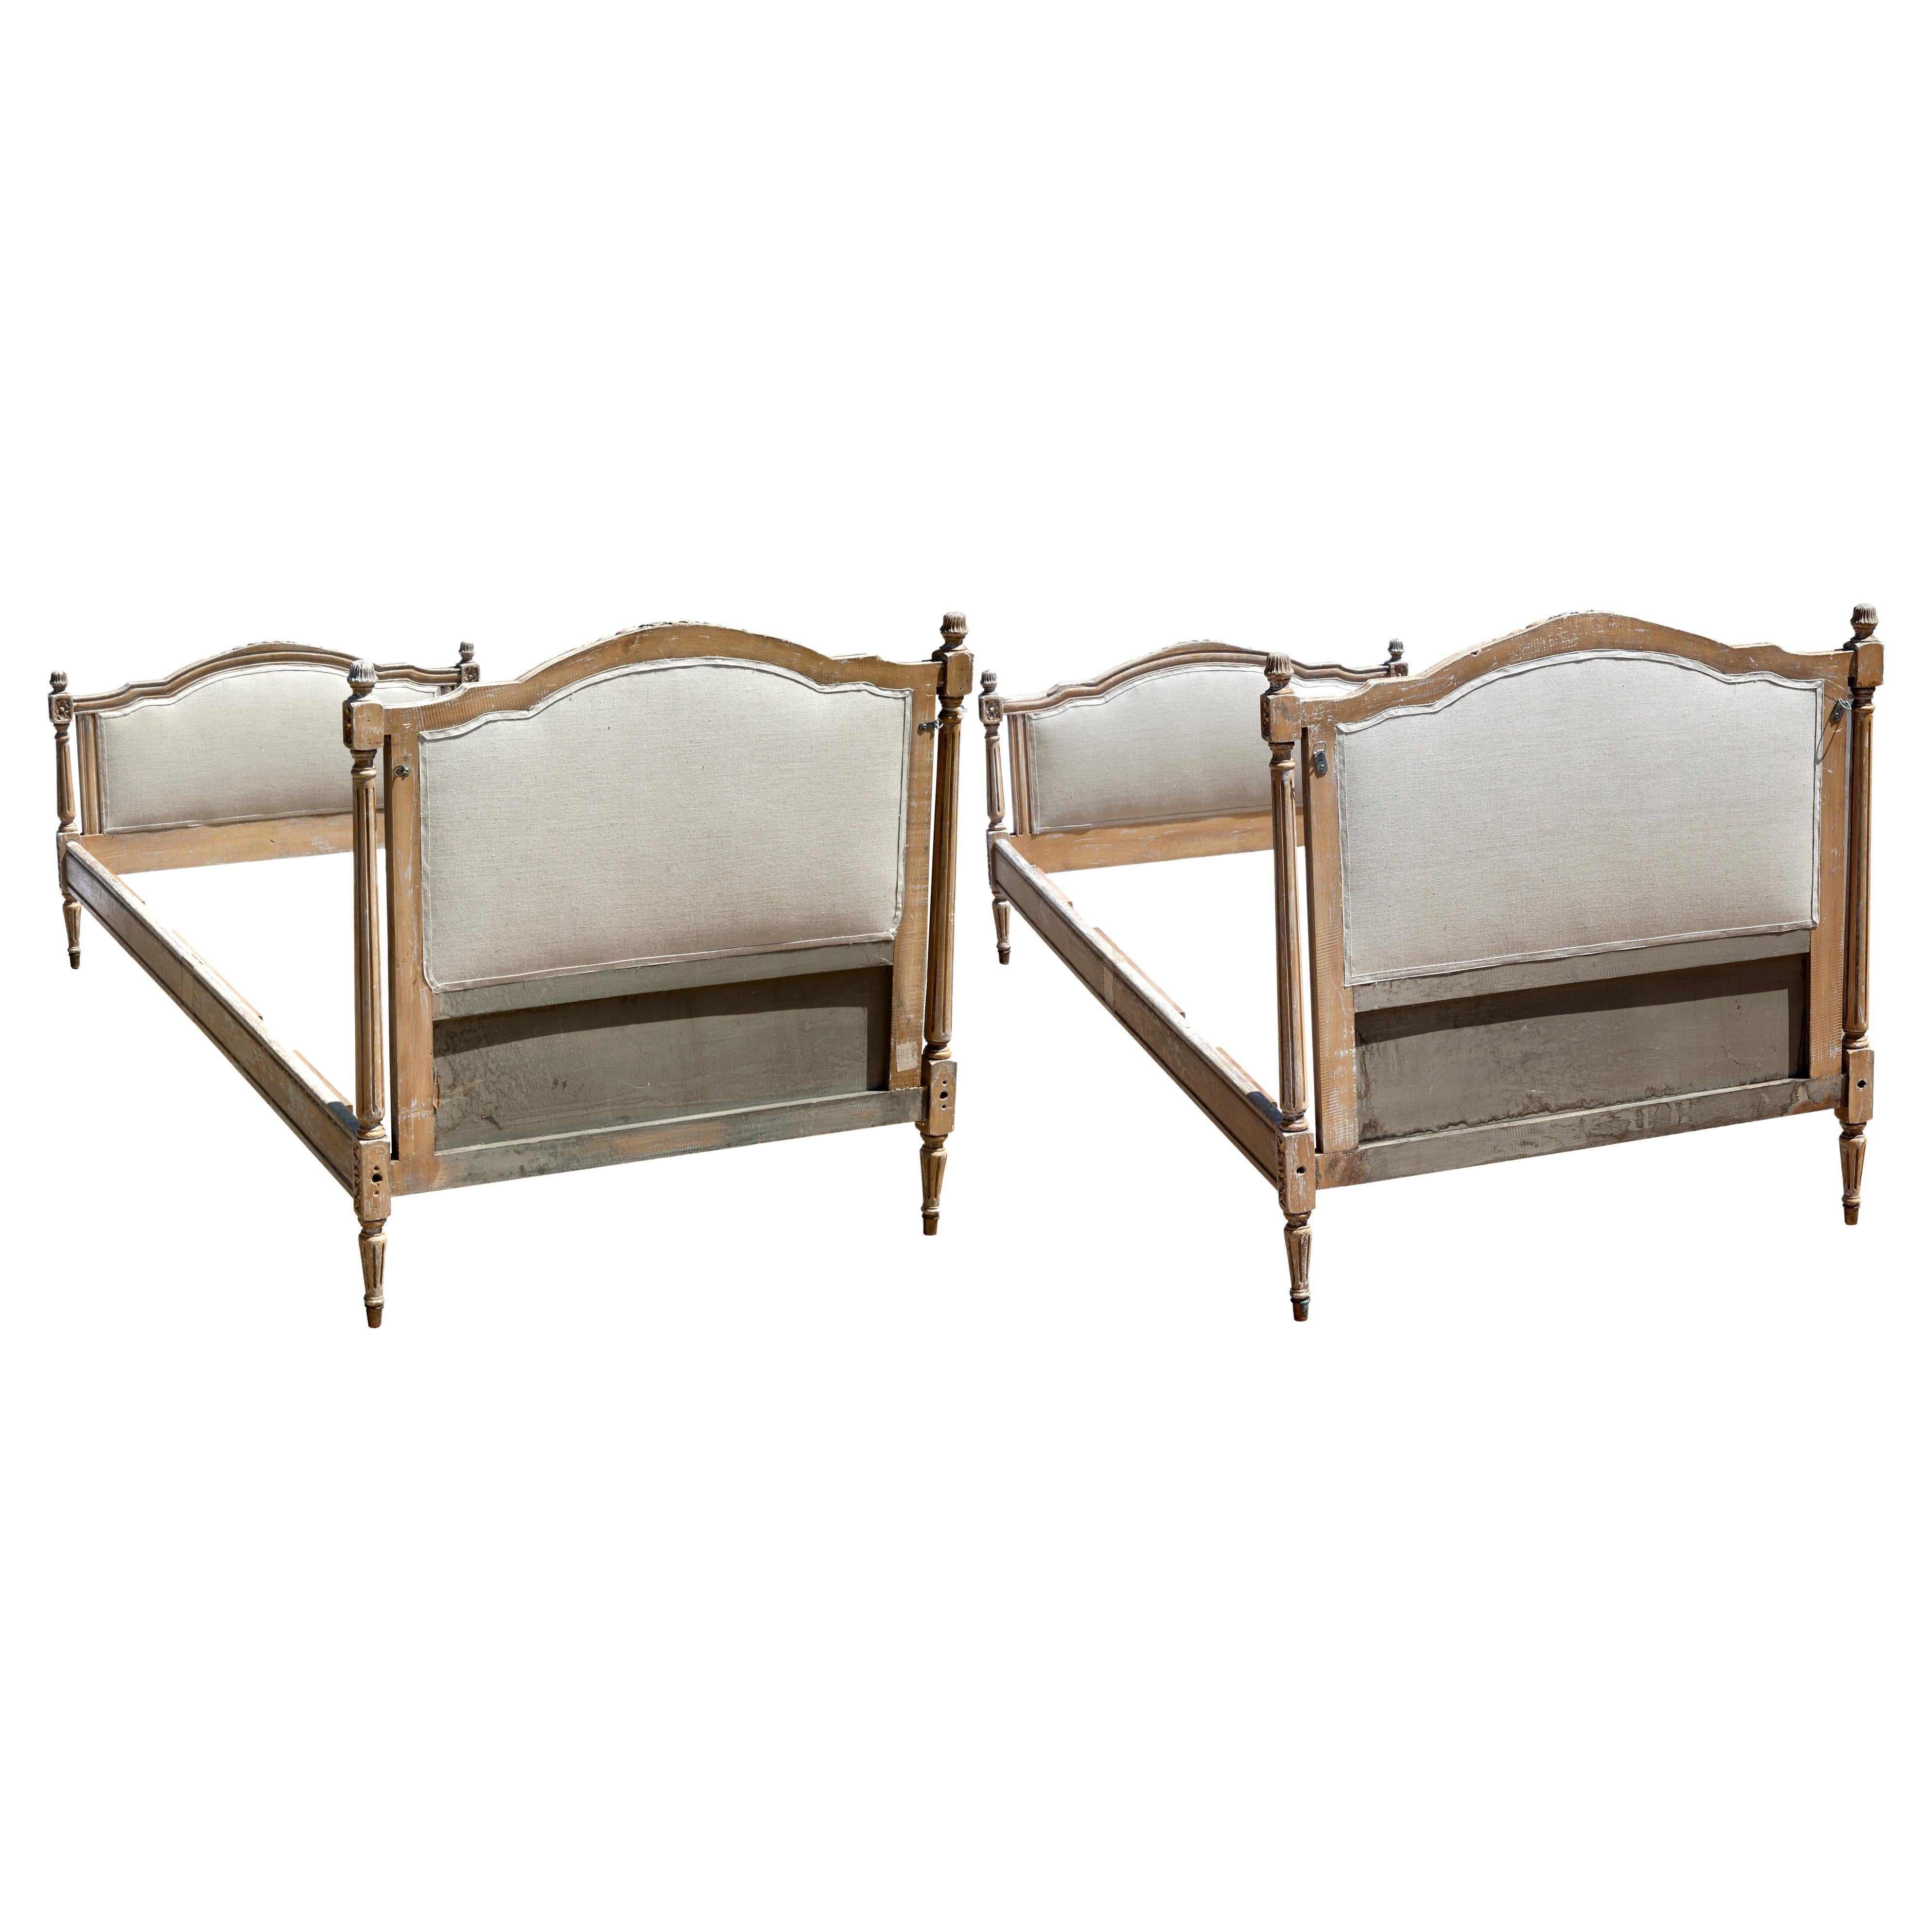 Antique French Louis XVI-style twin beds with original headboards, footboards & side rails. Hand-carved wood frame with original distressed finish with remnants of gilding. newly reupholstered in high quality European linen on both front & back of